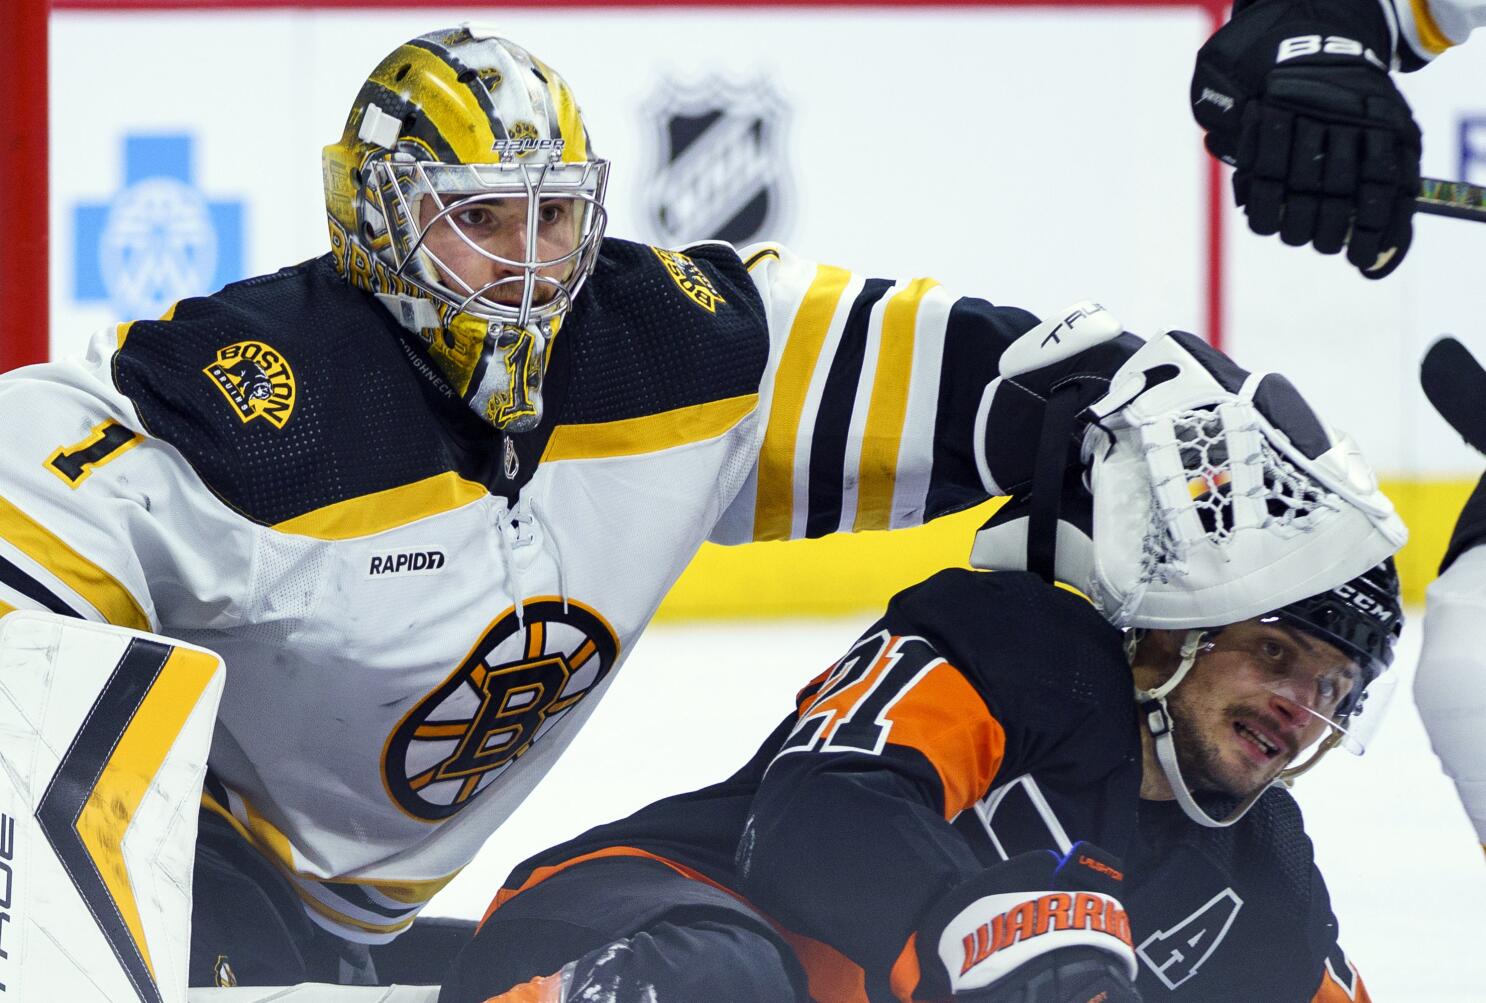 Bruins starting lineup: Jeremy Swayman likely to start over Linus Ullmark